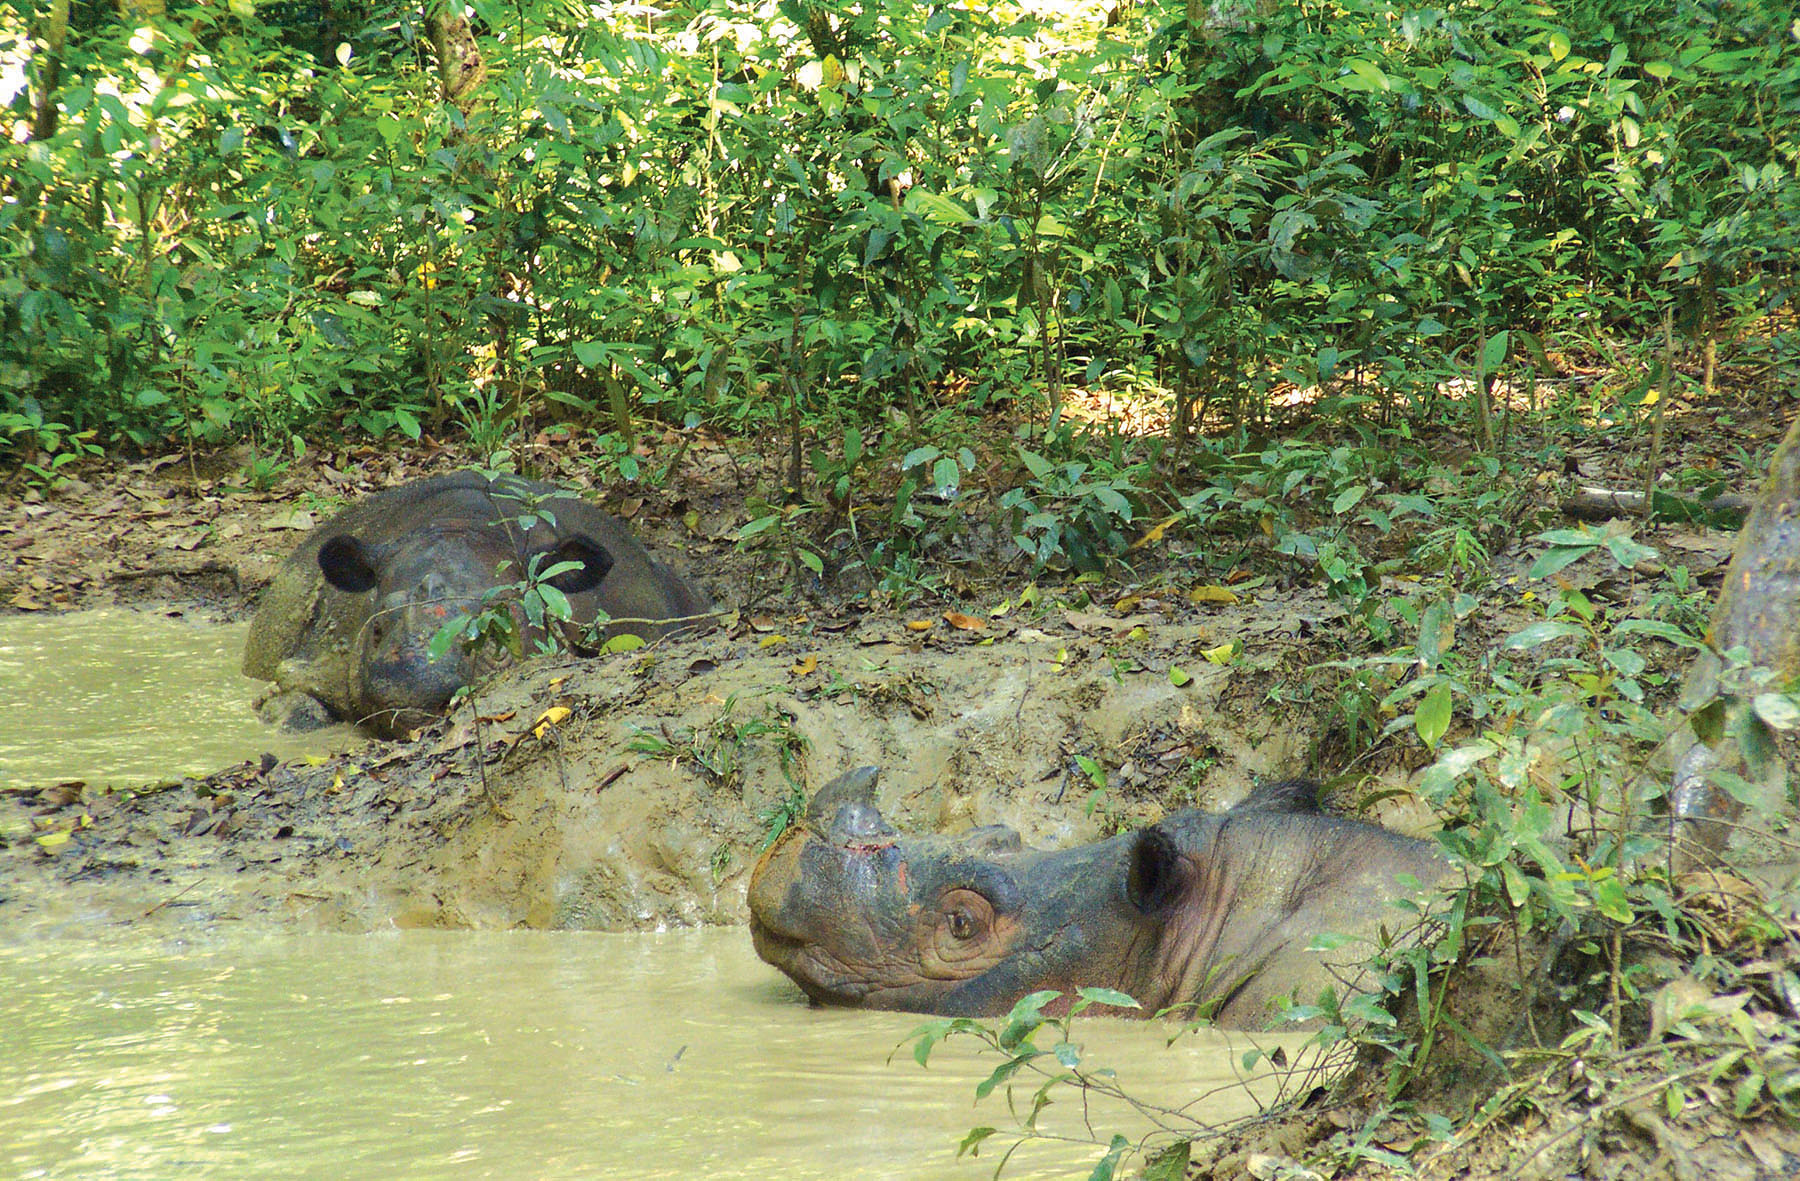 Relaxing in cool, muddy wallows at the SRS, Ratu, left, in 2012 became the first Sumatran rhino to give birth in captivity in Indonesia and only the fifth to do so worldwide; last year she gave birth to Delilah. At right, Andalas, the first Sumatran rhino to be born in captivity in more than a century, is 17 years old. He has fathered two calves with Ratu.